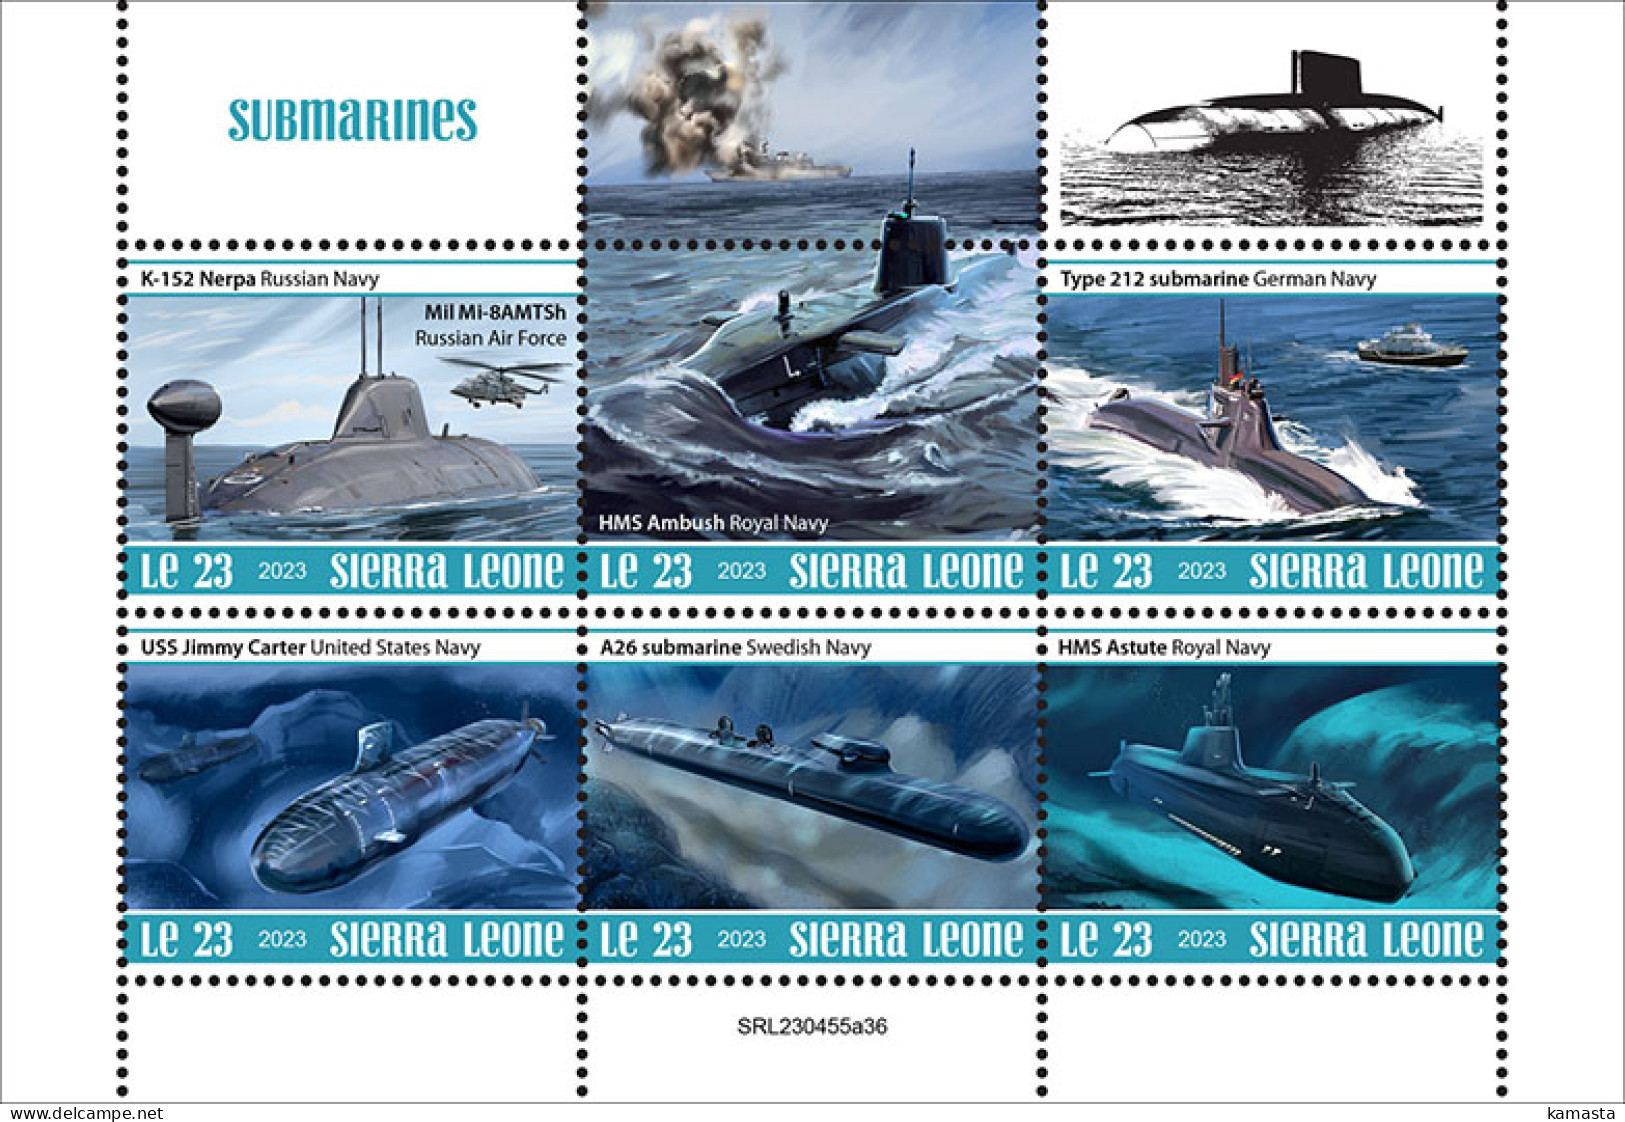 Sierra Leone  2023 Submarines. (445a36) OFFICIAL ISSUE - Sottomarini